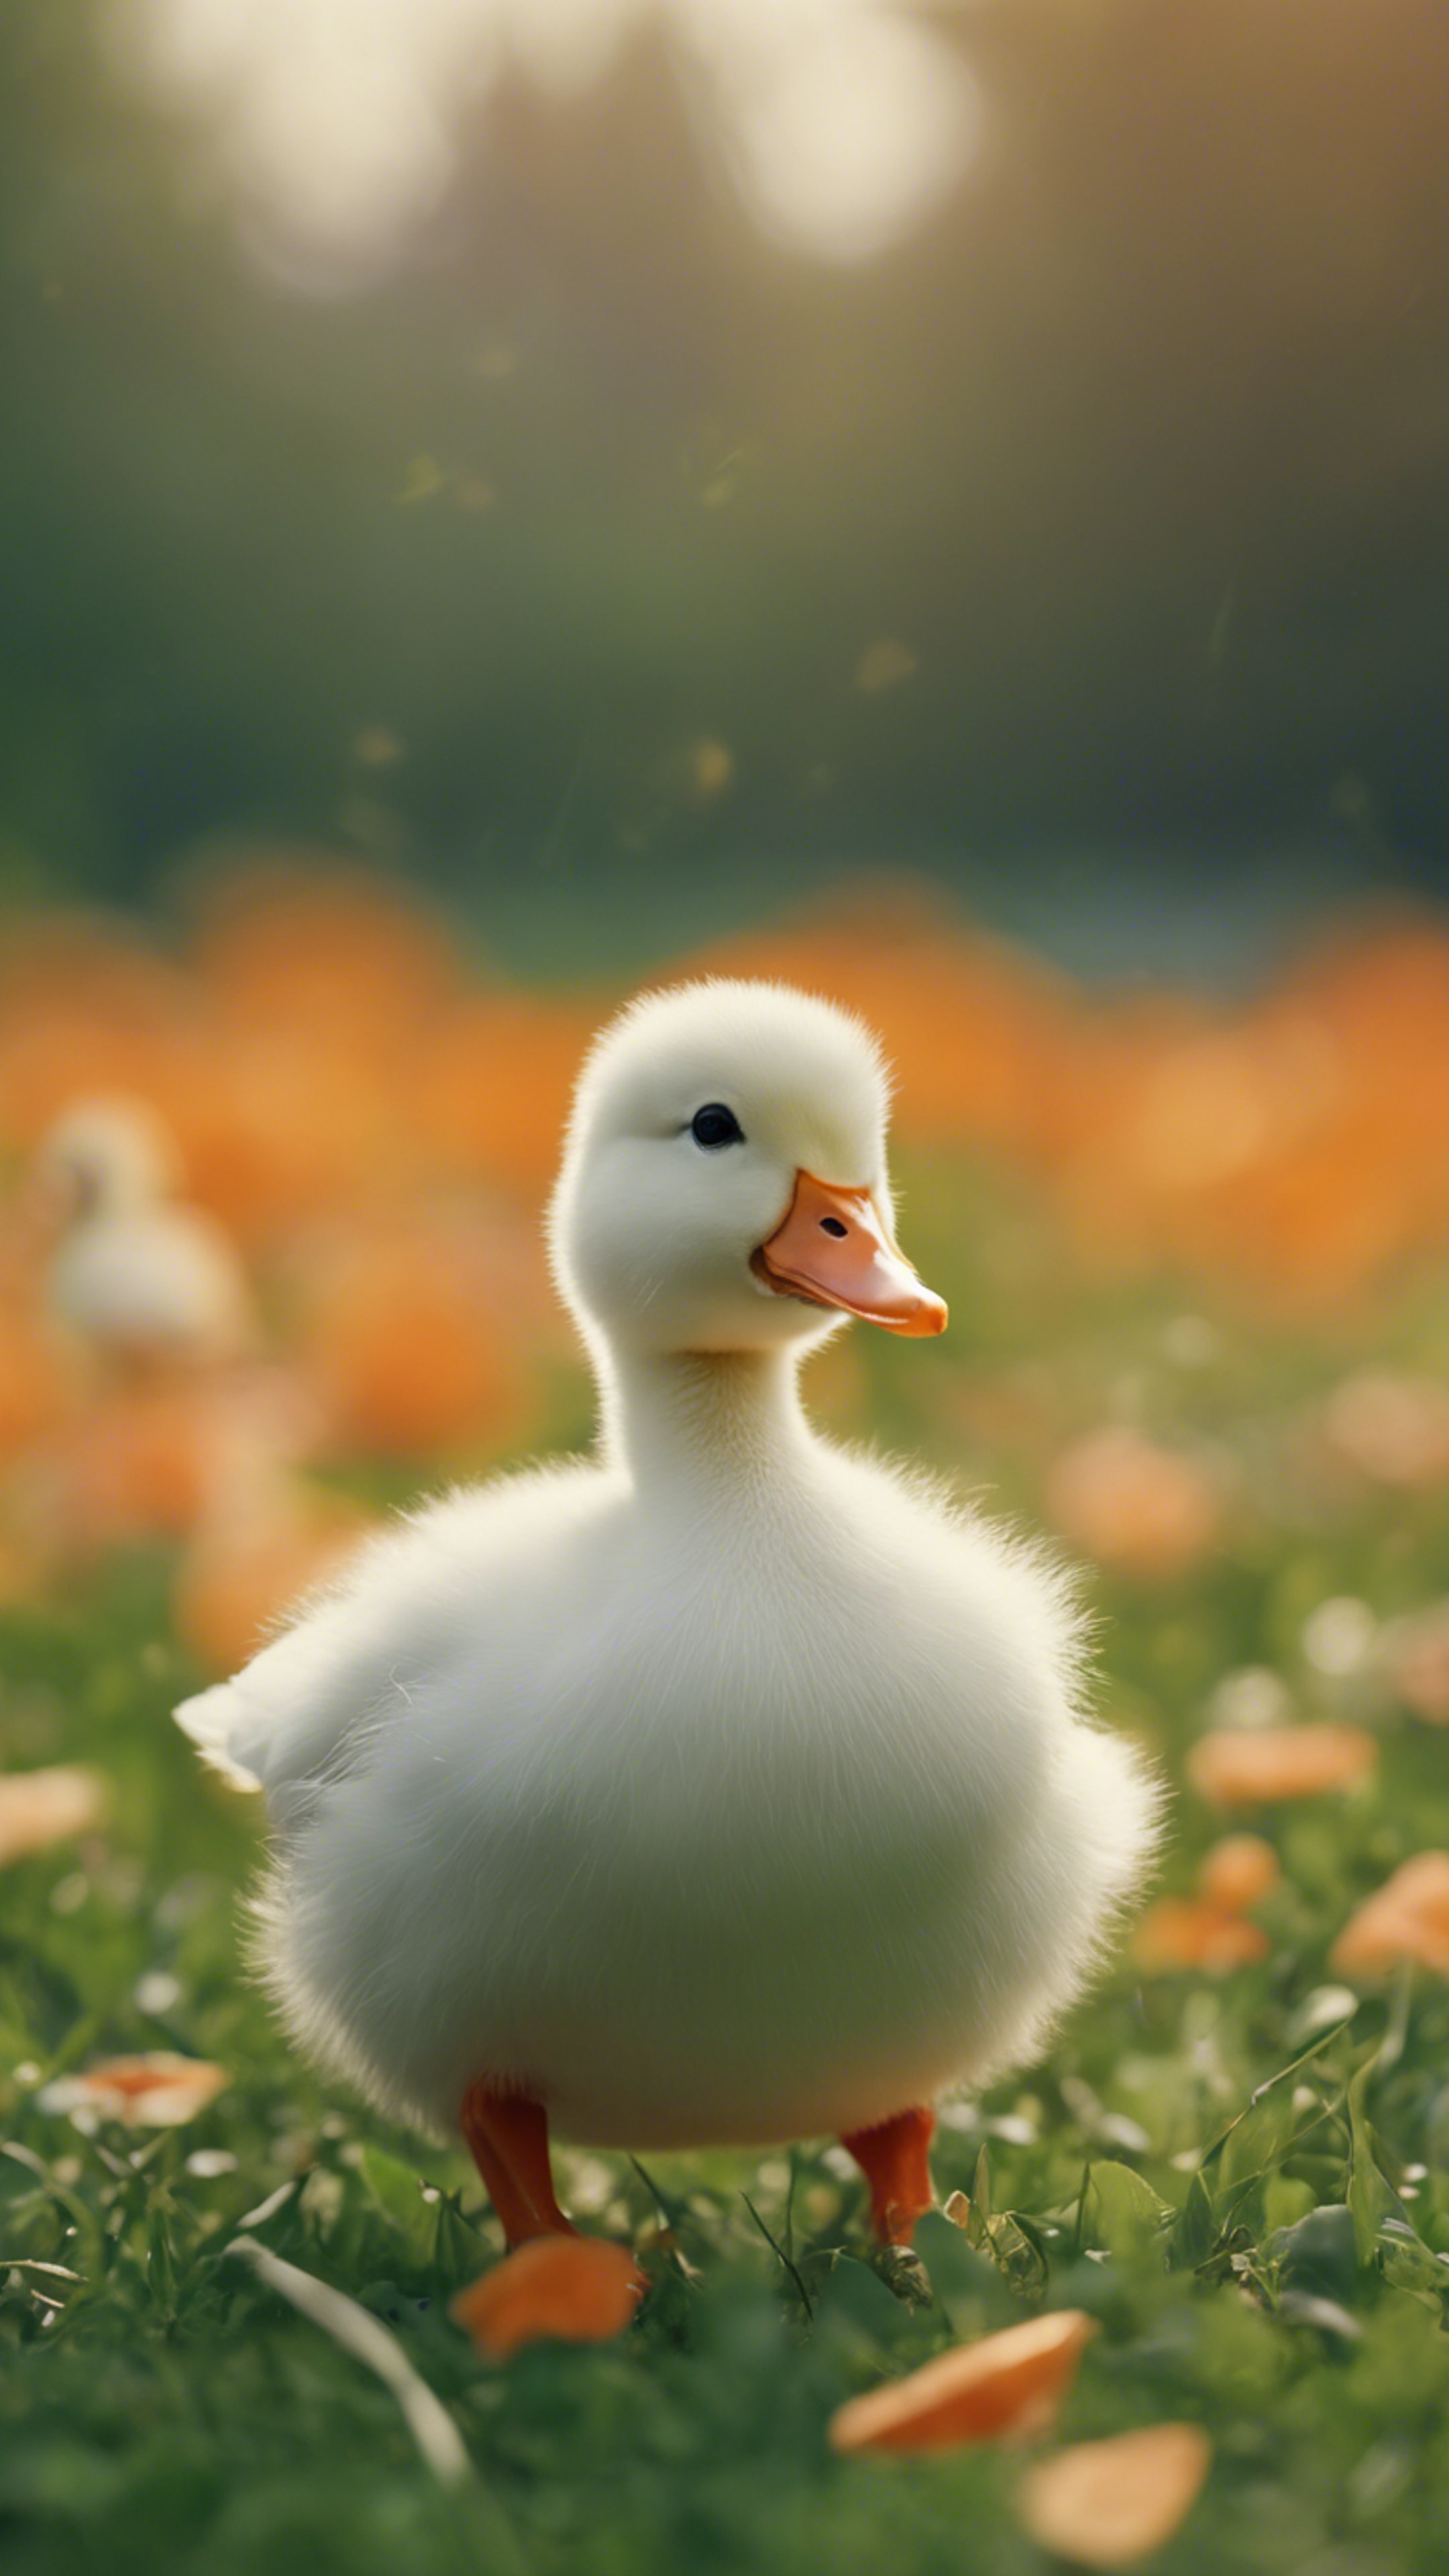 An adorable fluffy white duck with a bright orange bill is waddling happily across a green meadow. Tapeet[c976b0c80c1040dead0f]